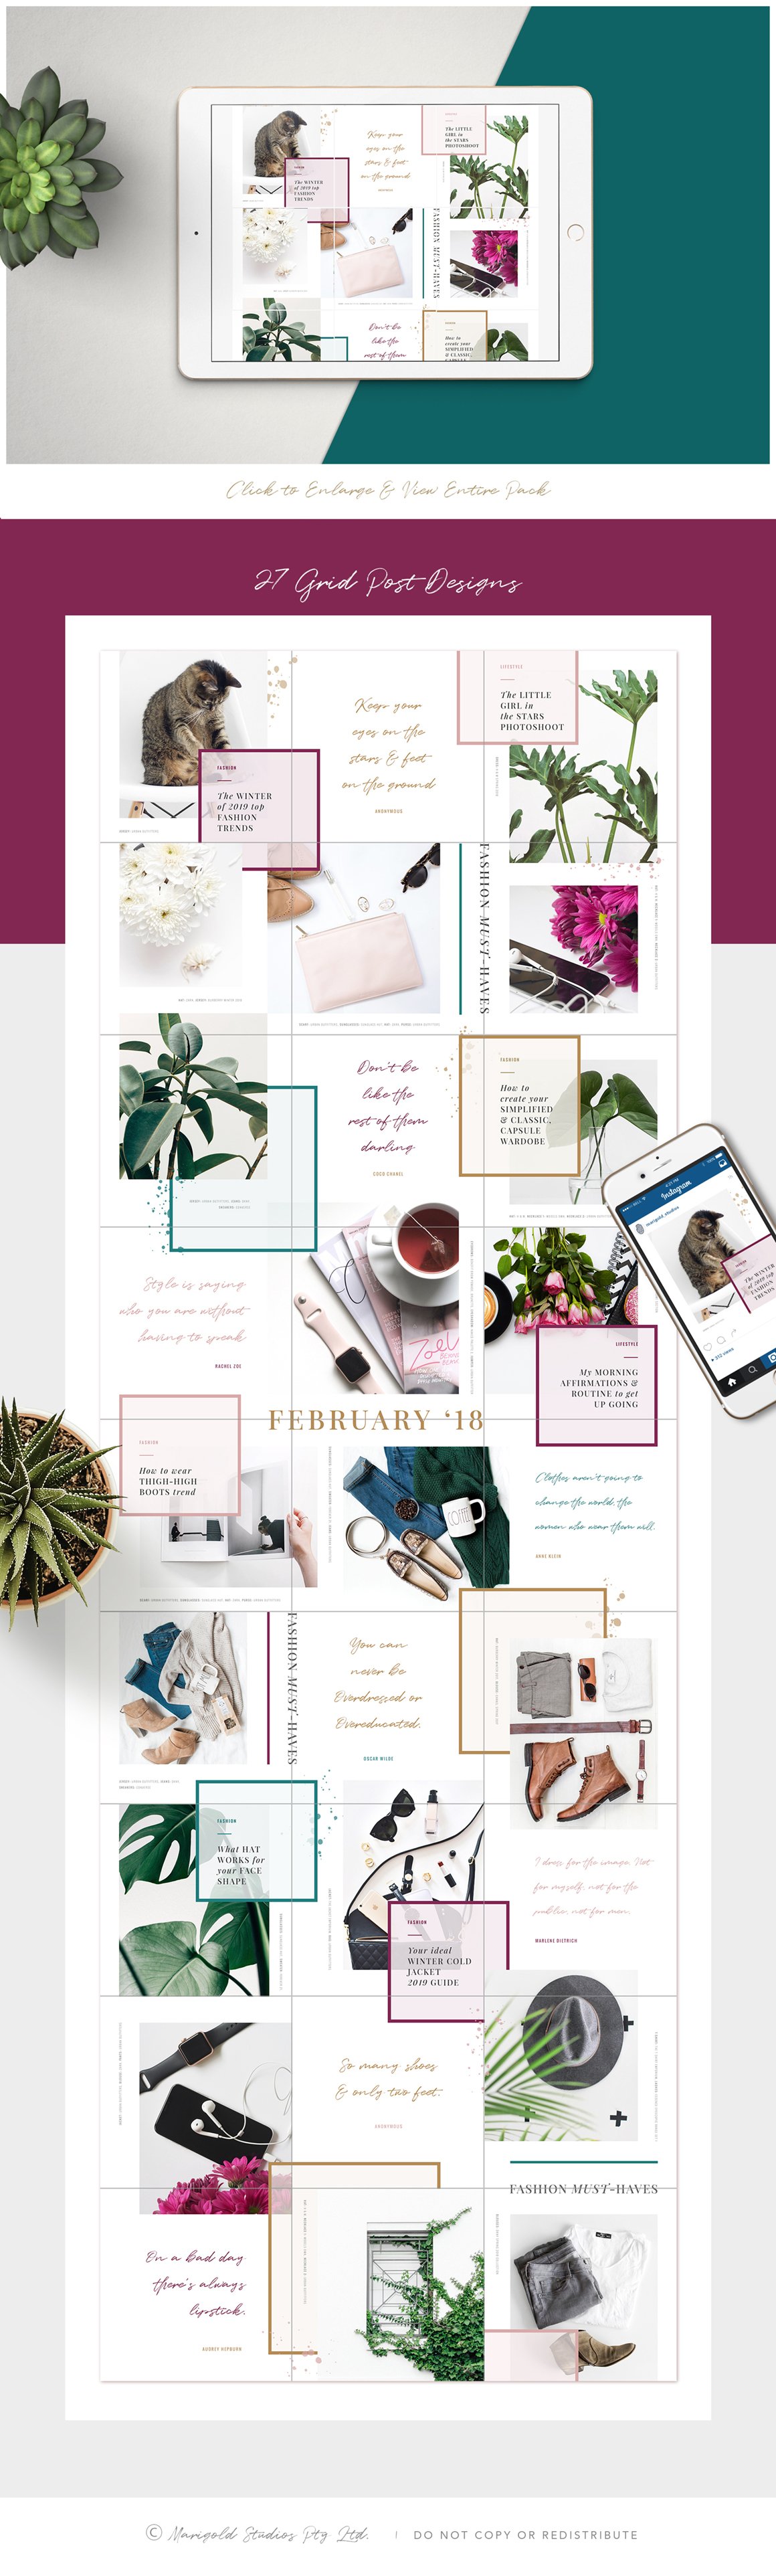 The Grid Instagram Layout Template